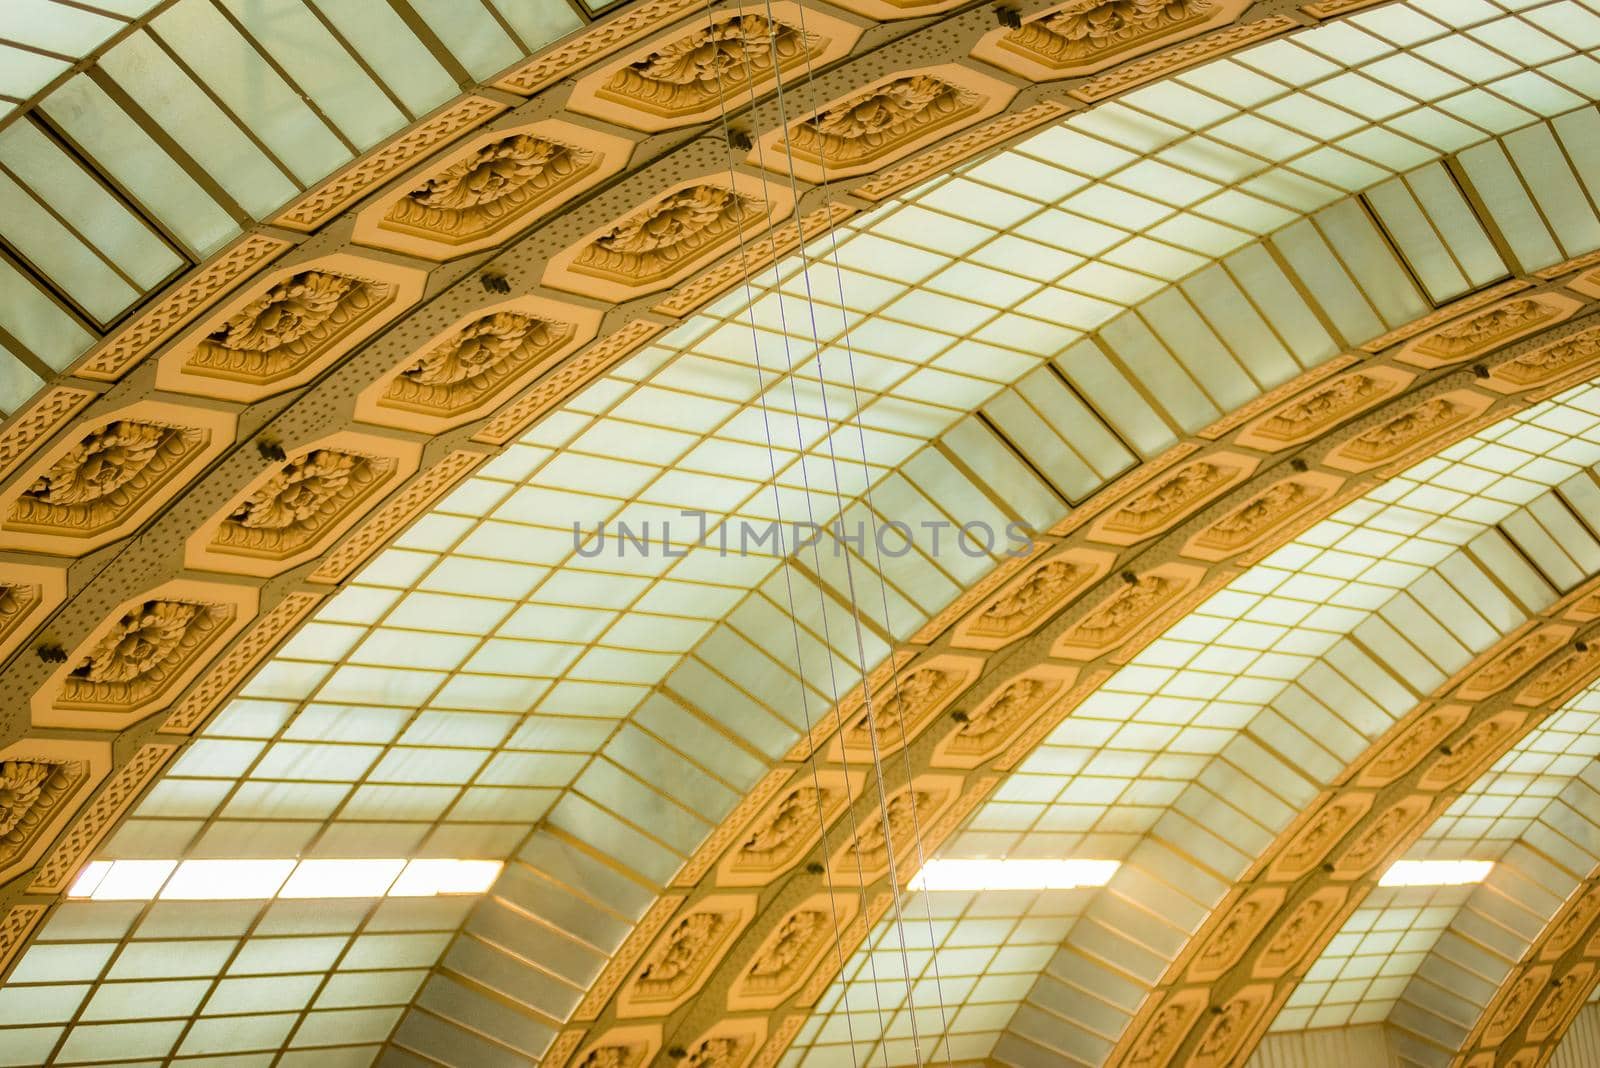 Paris, France - February 3, 2017: Detail photo of sage green and gold patterned arches inside of a Paris museum.